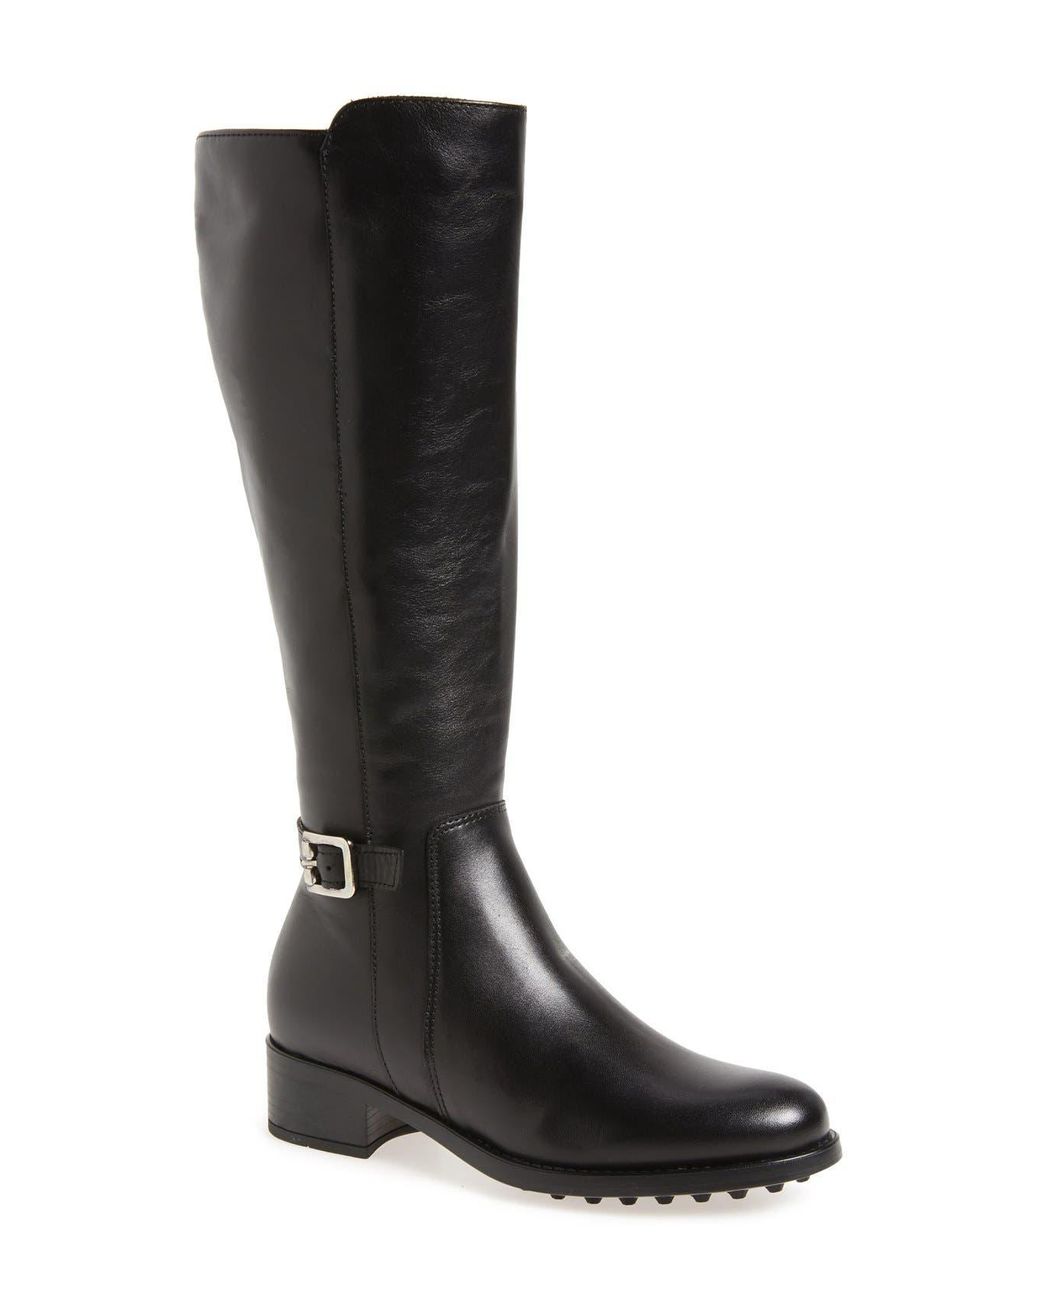 La Canadienne Silvana Waterproof Riding Boot In Black Leather At ...